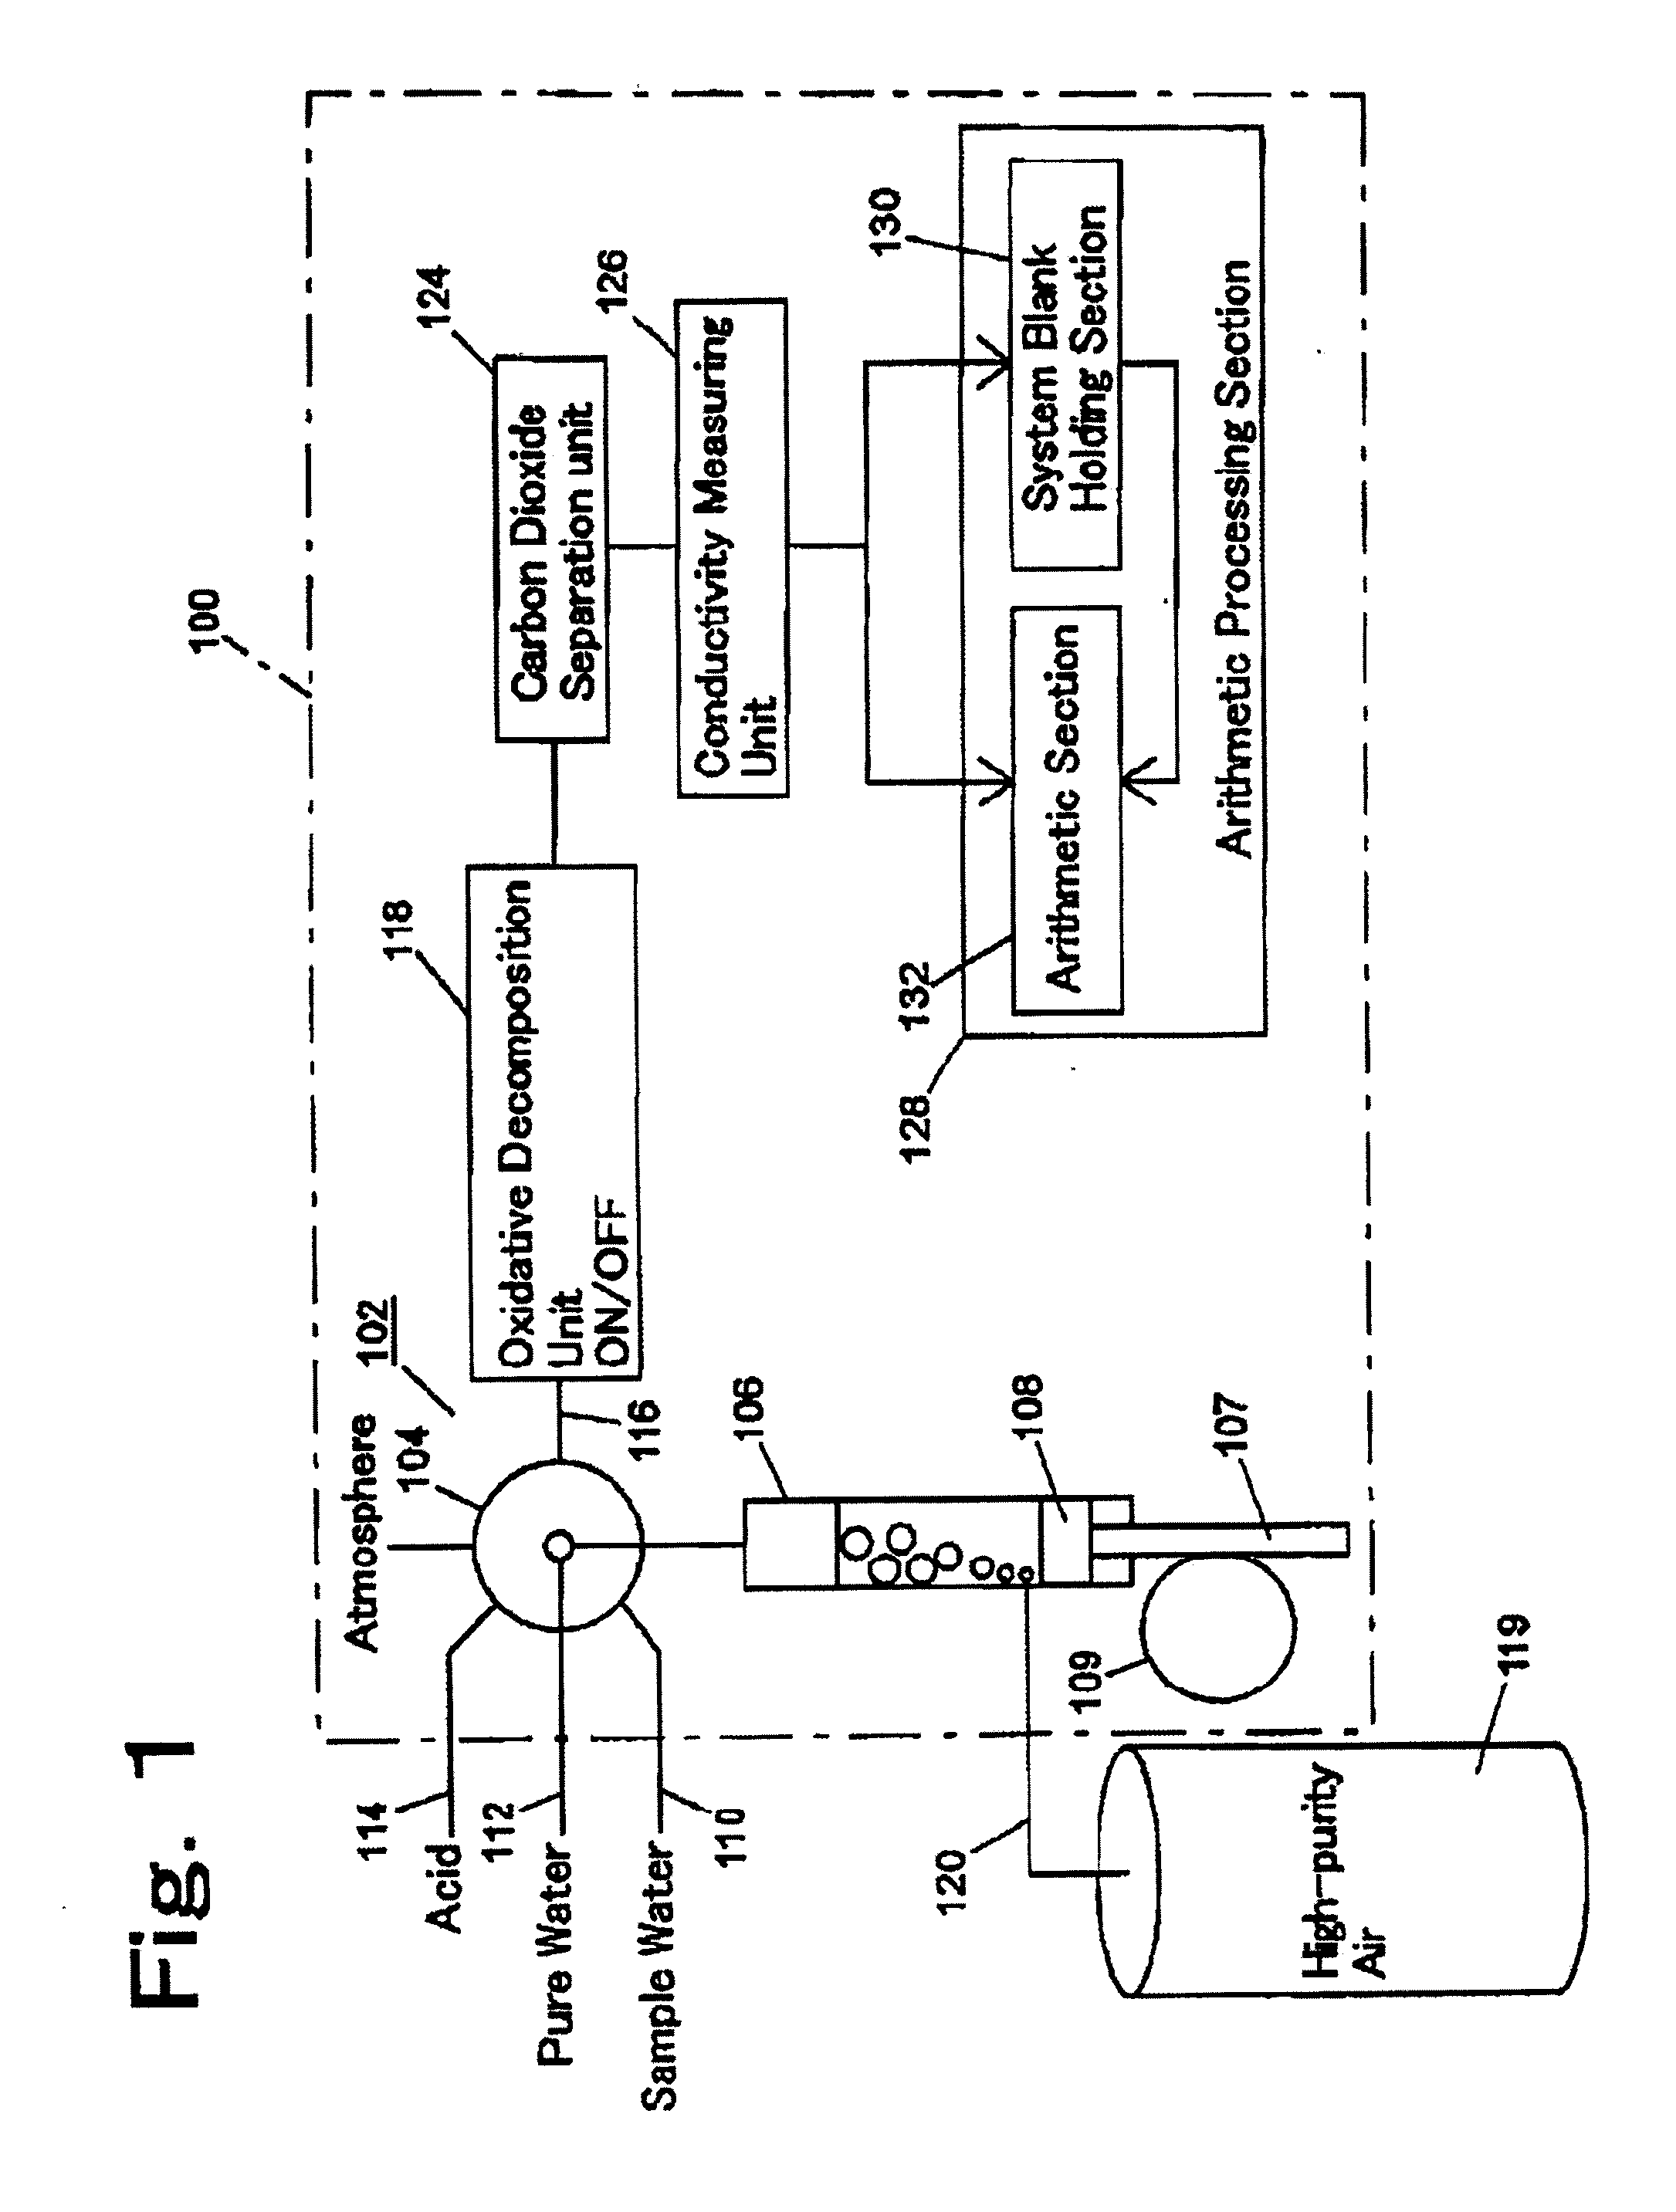 Total organic carbon meter provided with system blank function